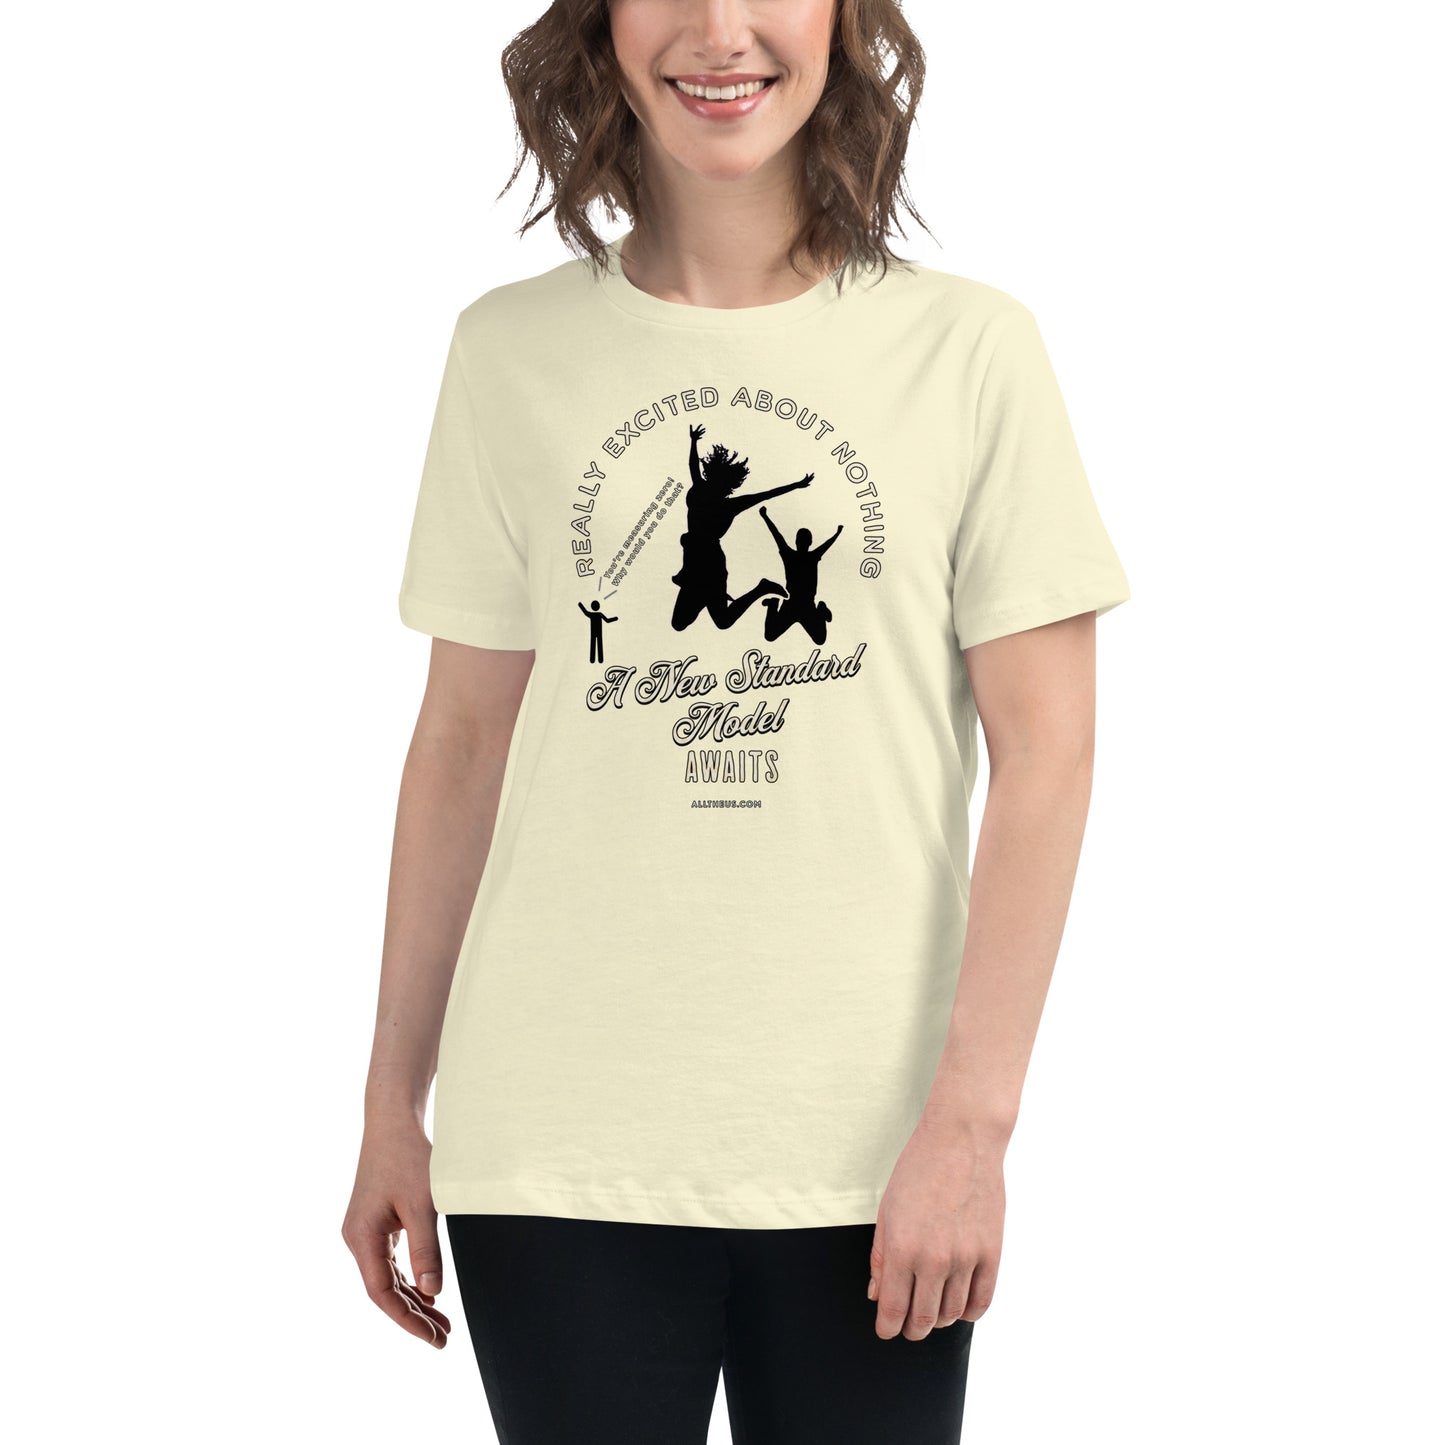 Women's Relaxed T-Shirt: A Noughty Electron Dipole Moment?